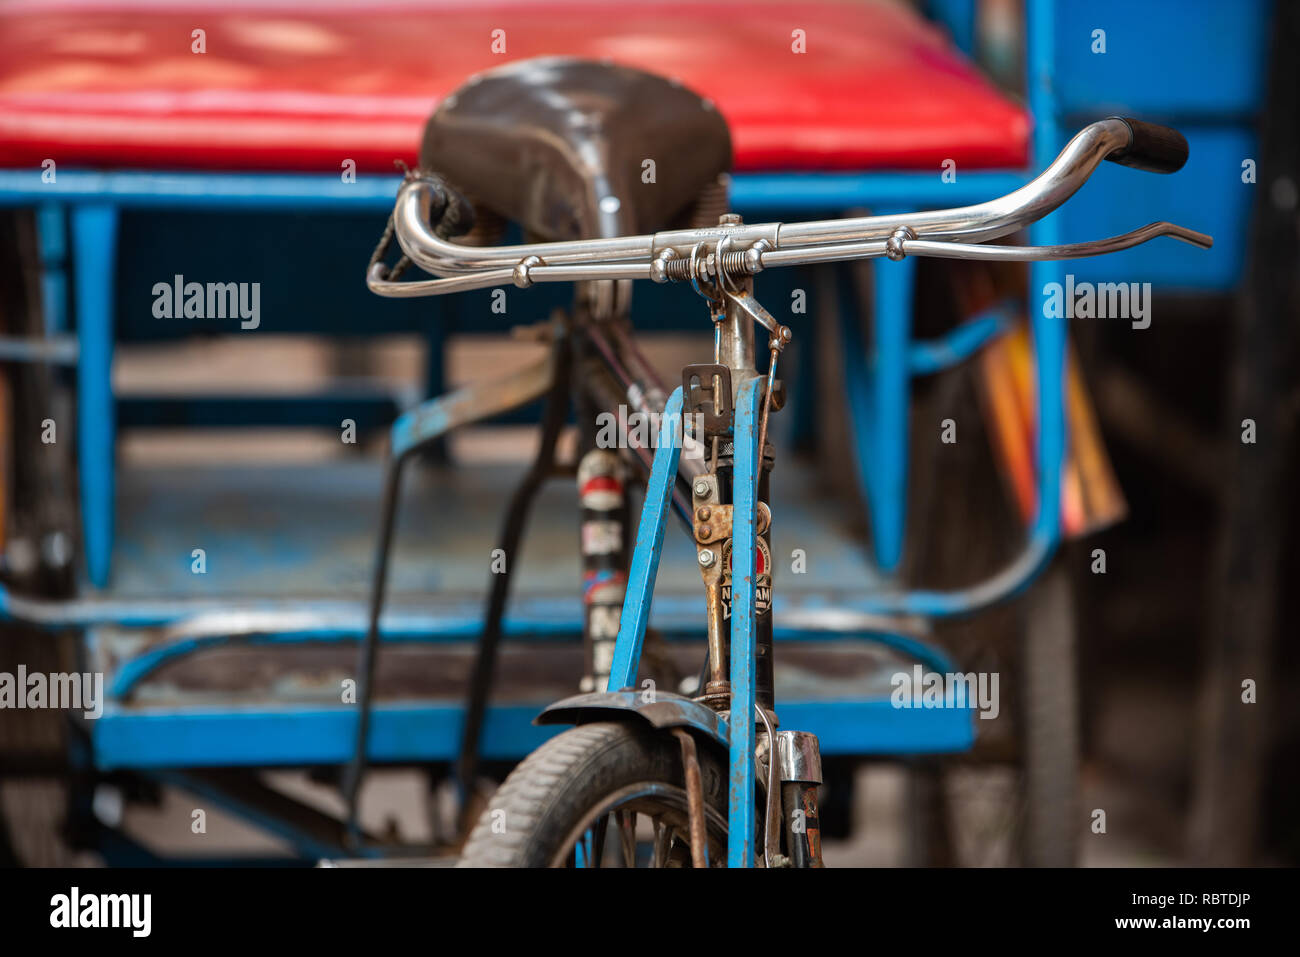 Cycle rickshaw as viewed from the front with a handle bar and seat visible. Taken in Chandni Chowk, Delhi Stock Photo